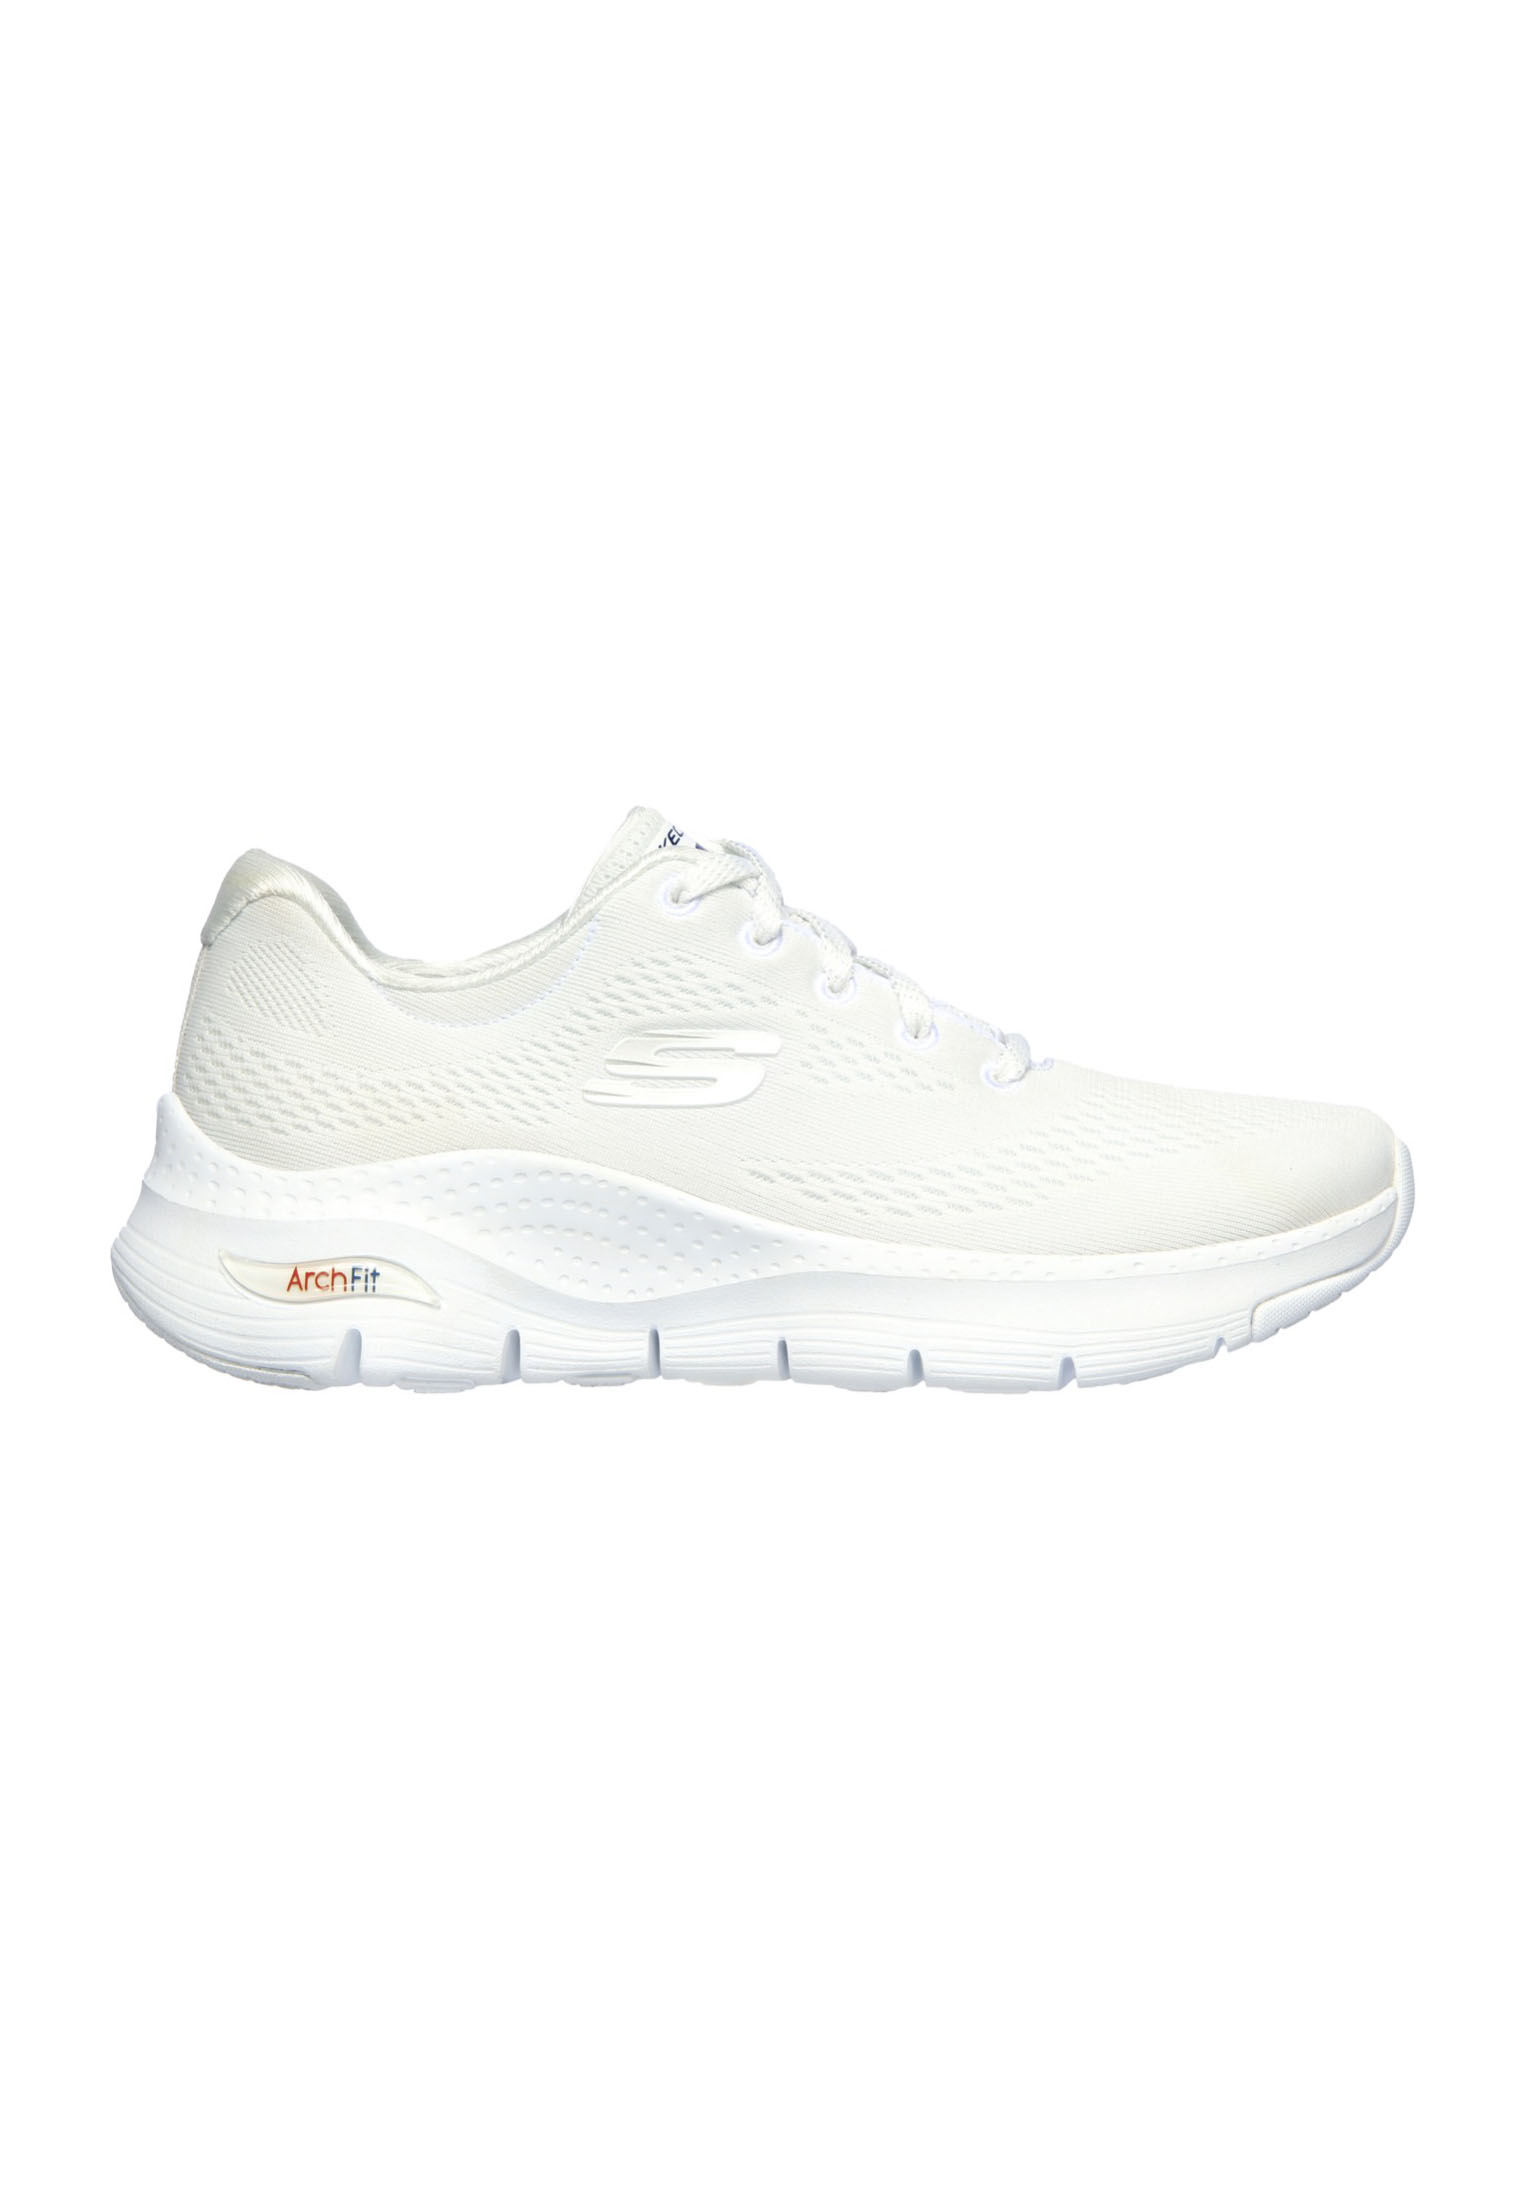 Skechers Arch Fit - Big Appeal 149057/WNVR Wit-37 maat 37